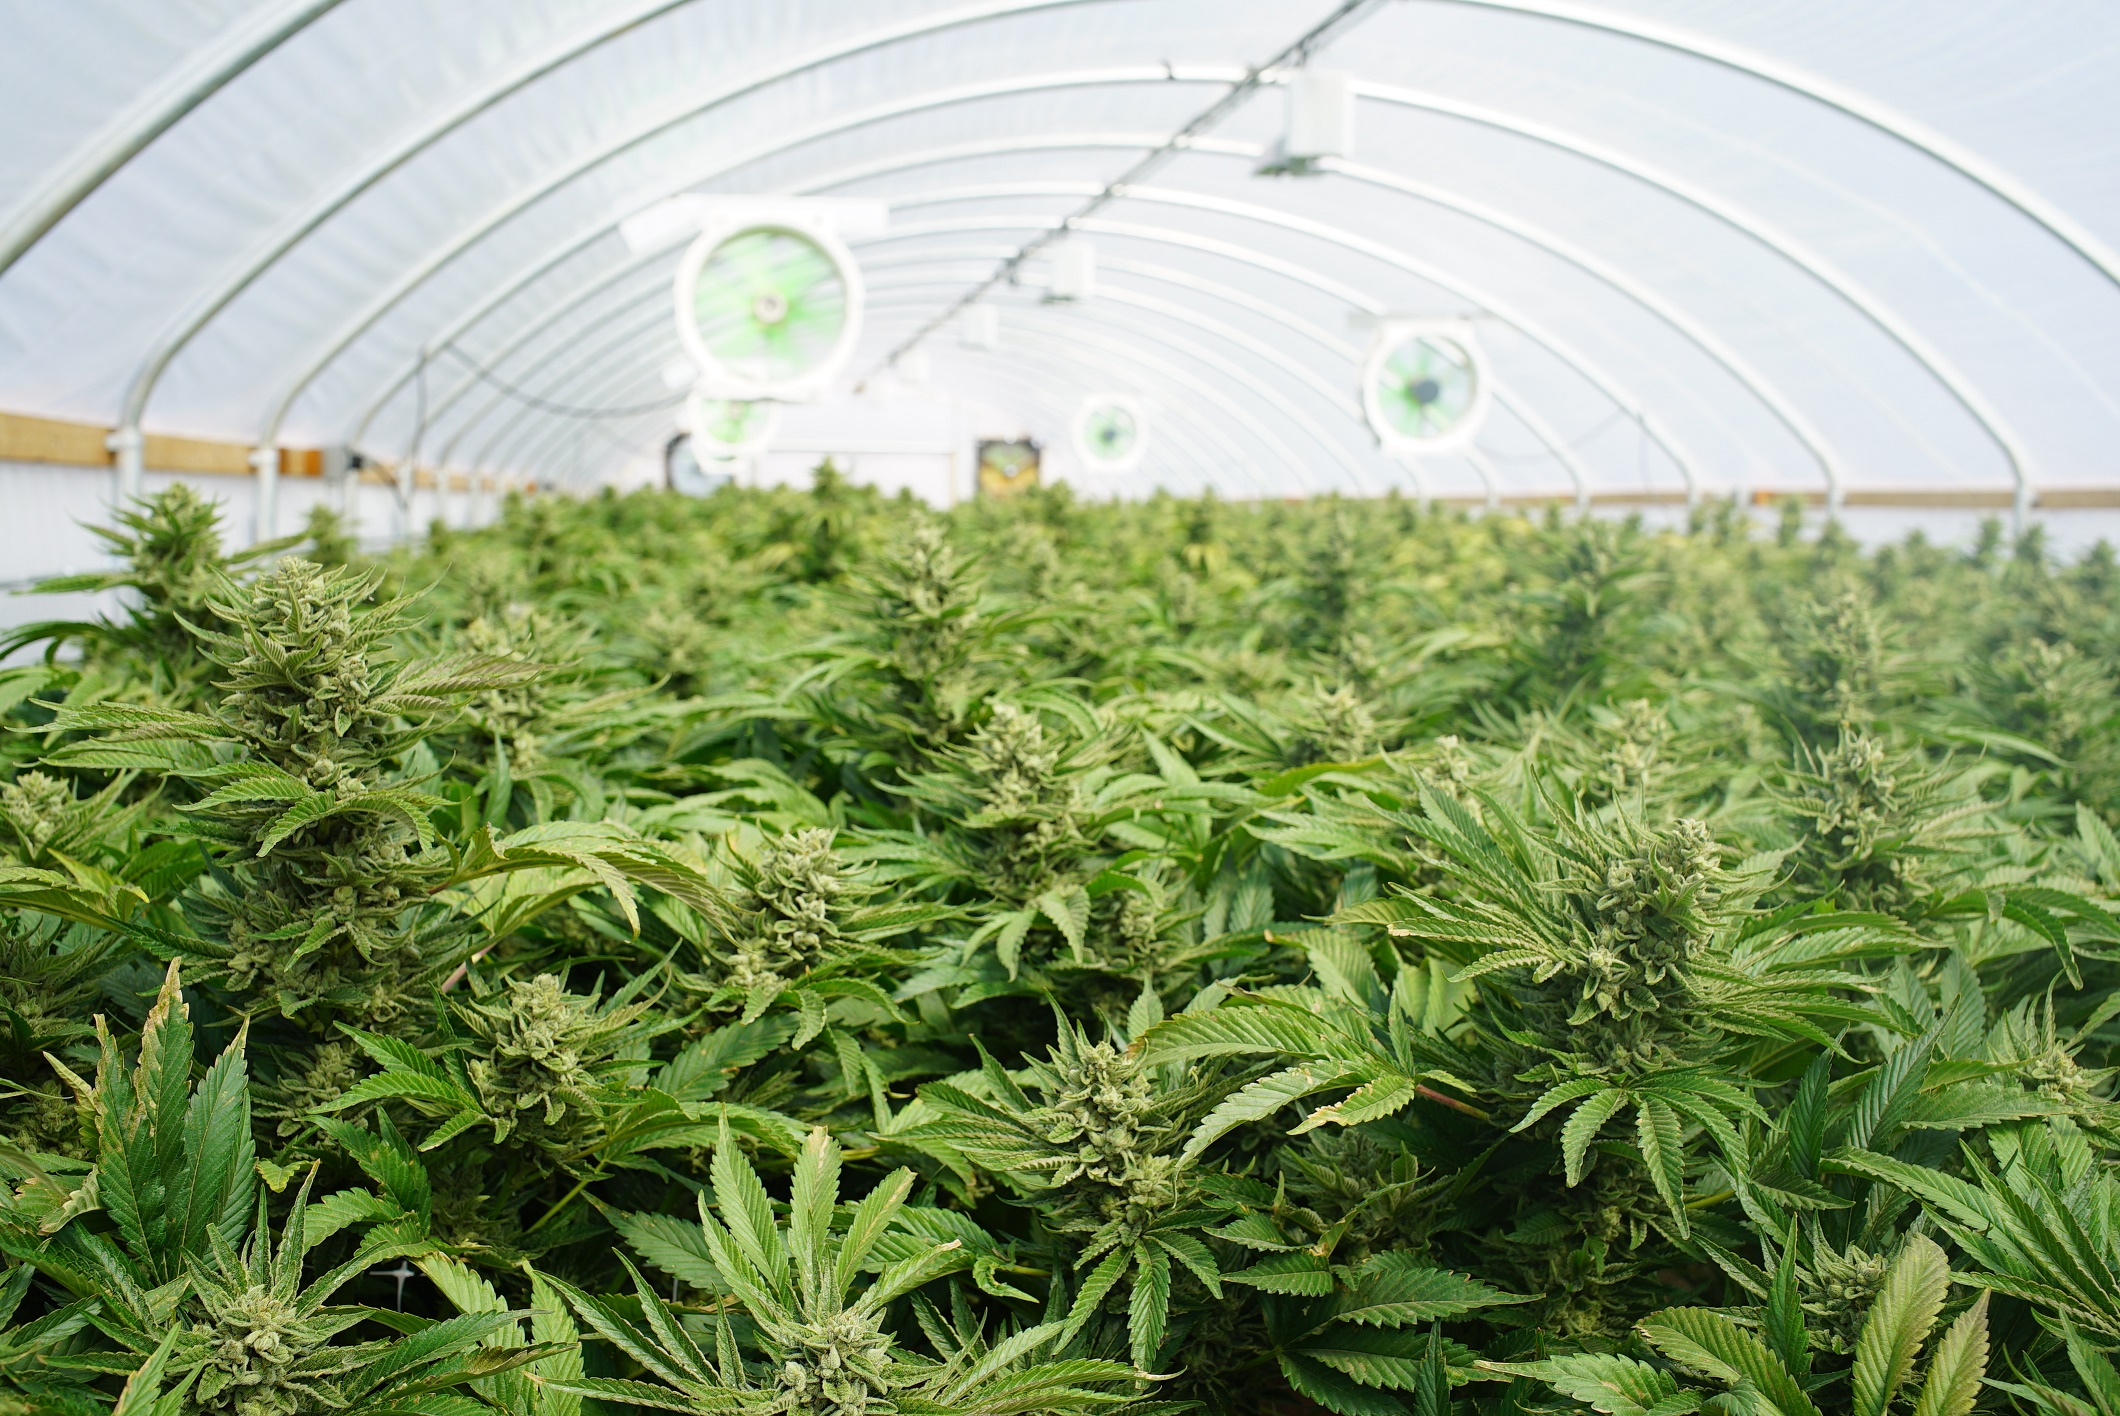 Will Canopy Growth Corp (TSX:WEED) Soar to New Highs in 2019?